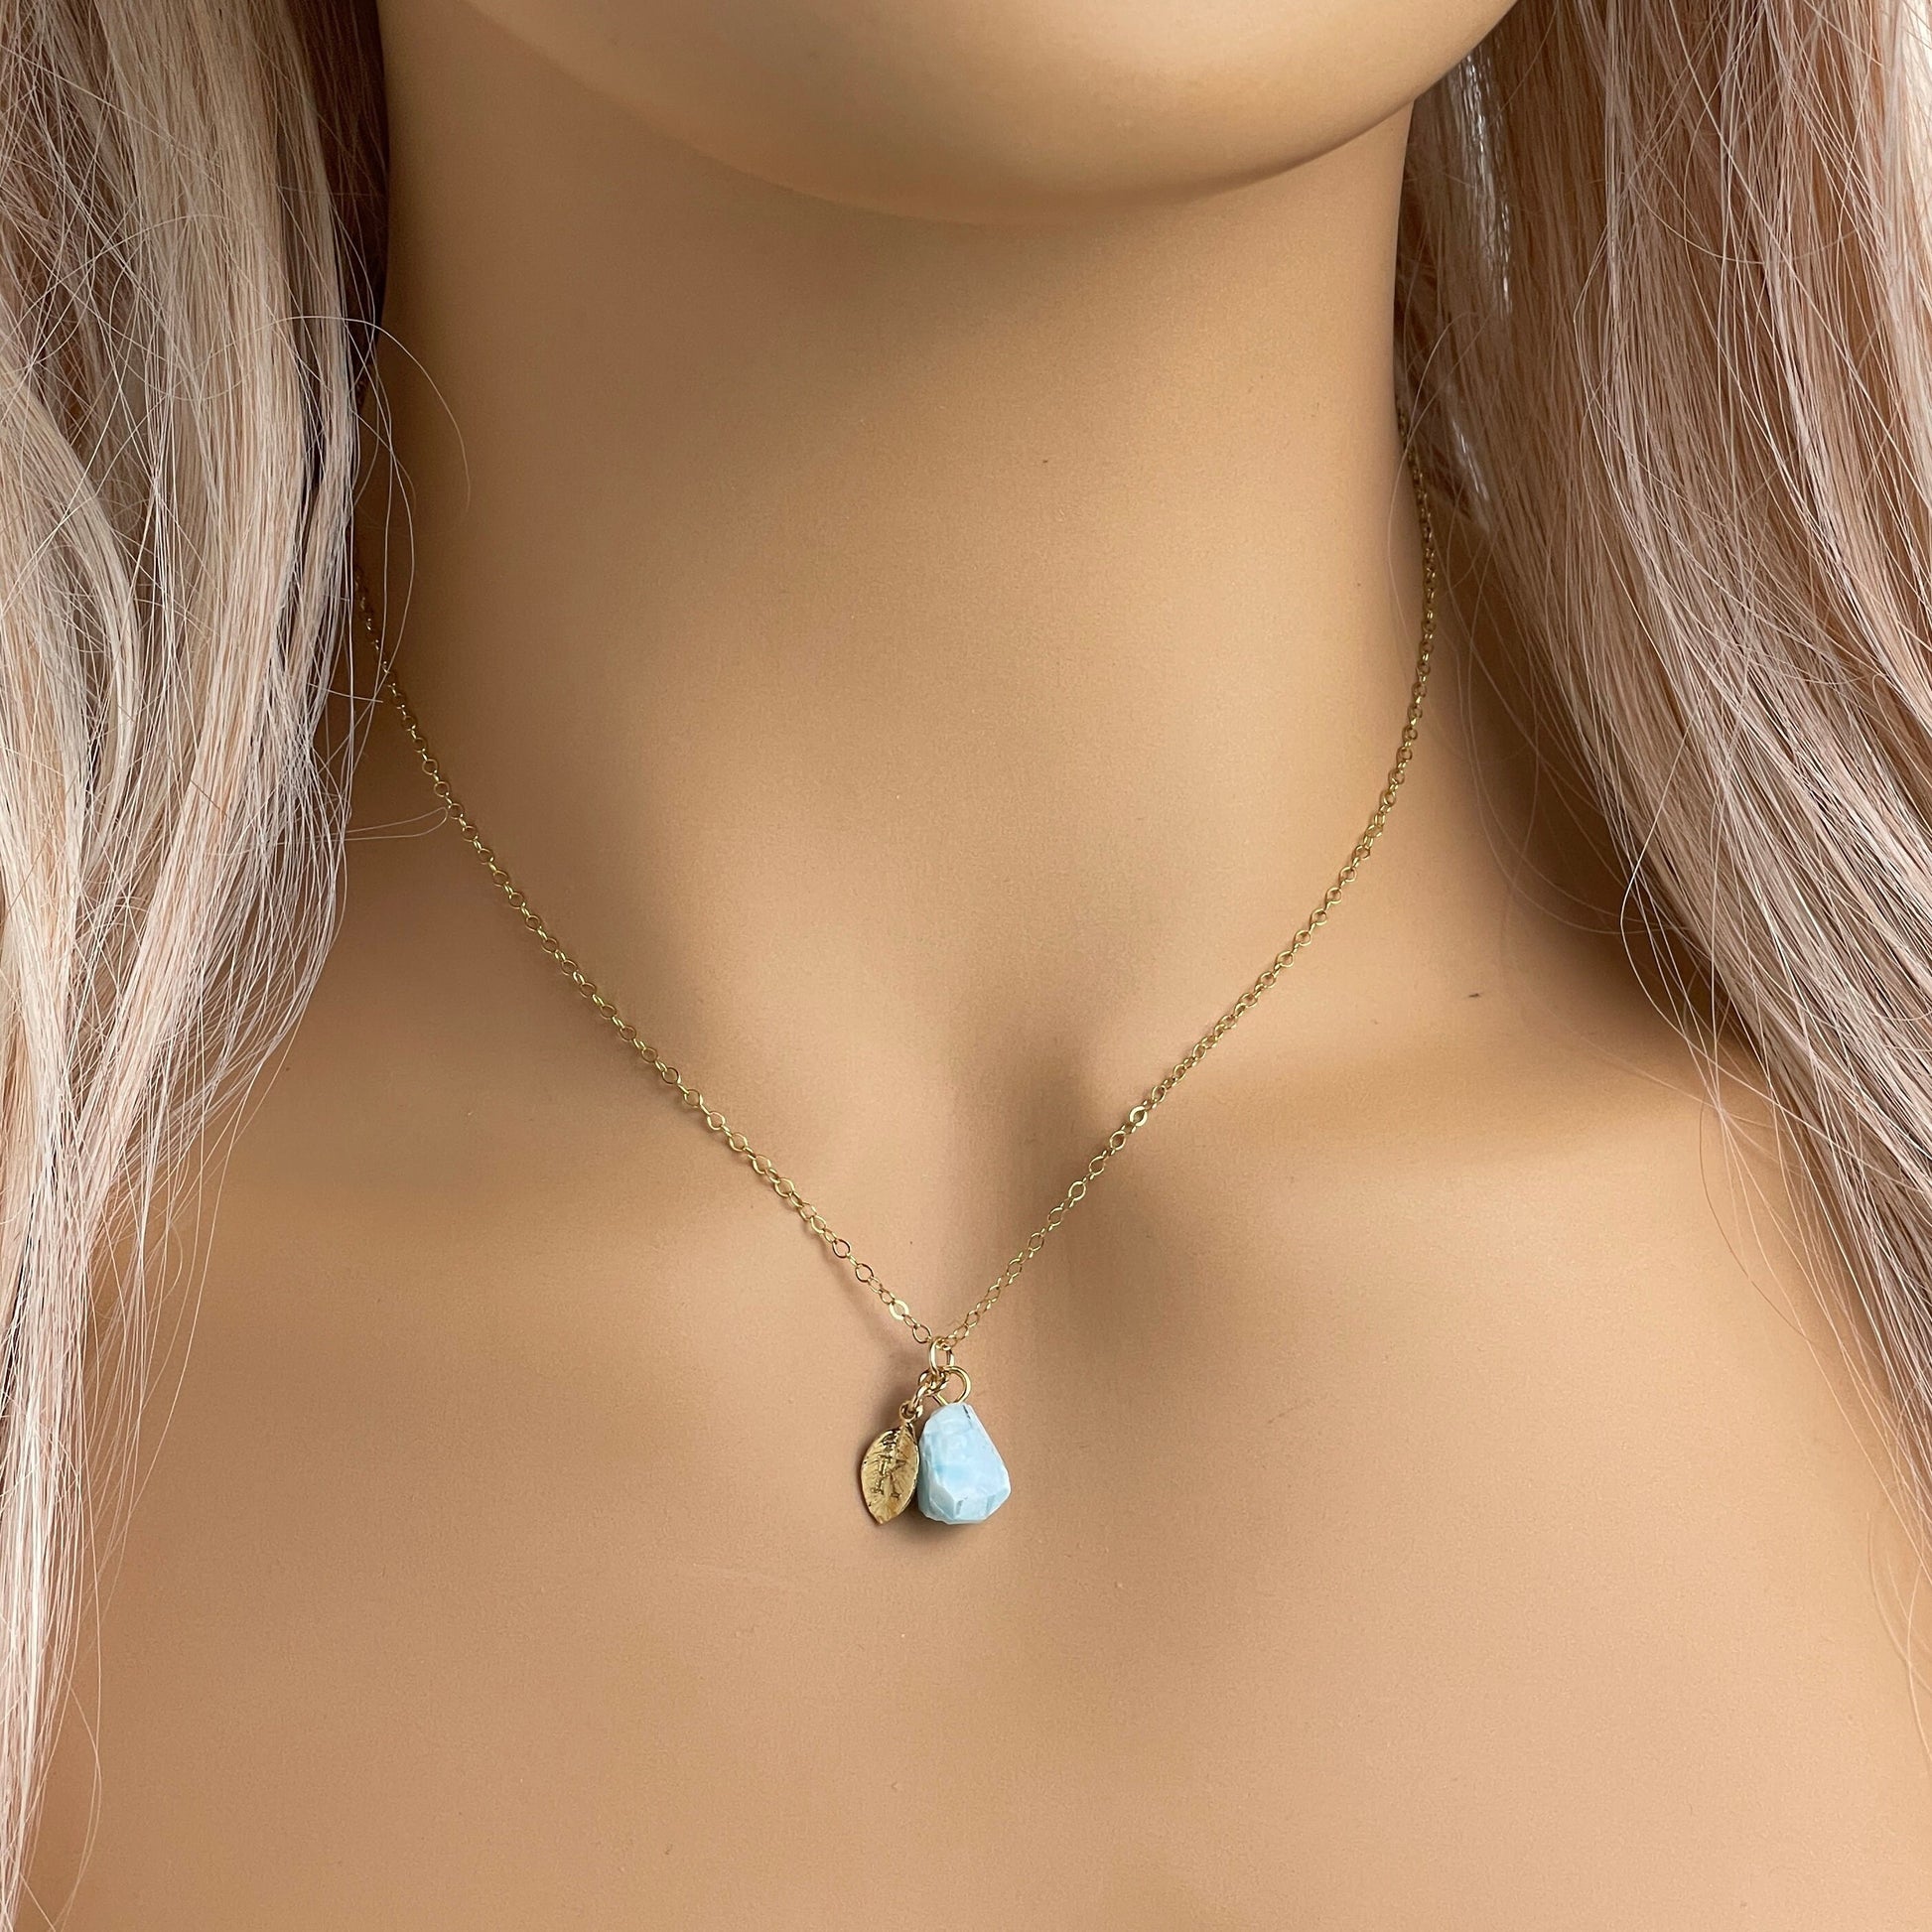 Blue Larimar Necklace Personalized, Raw Larimar Gemstone on 14K Gold Filled Chain, Christmas Gift For Best Friend, Gifts For Wife, M5-349